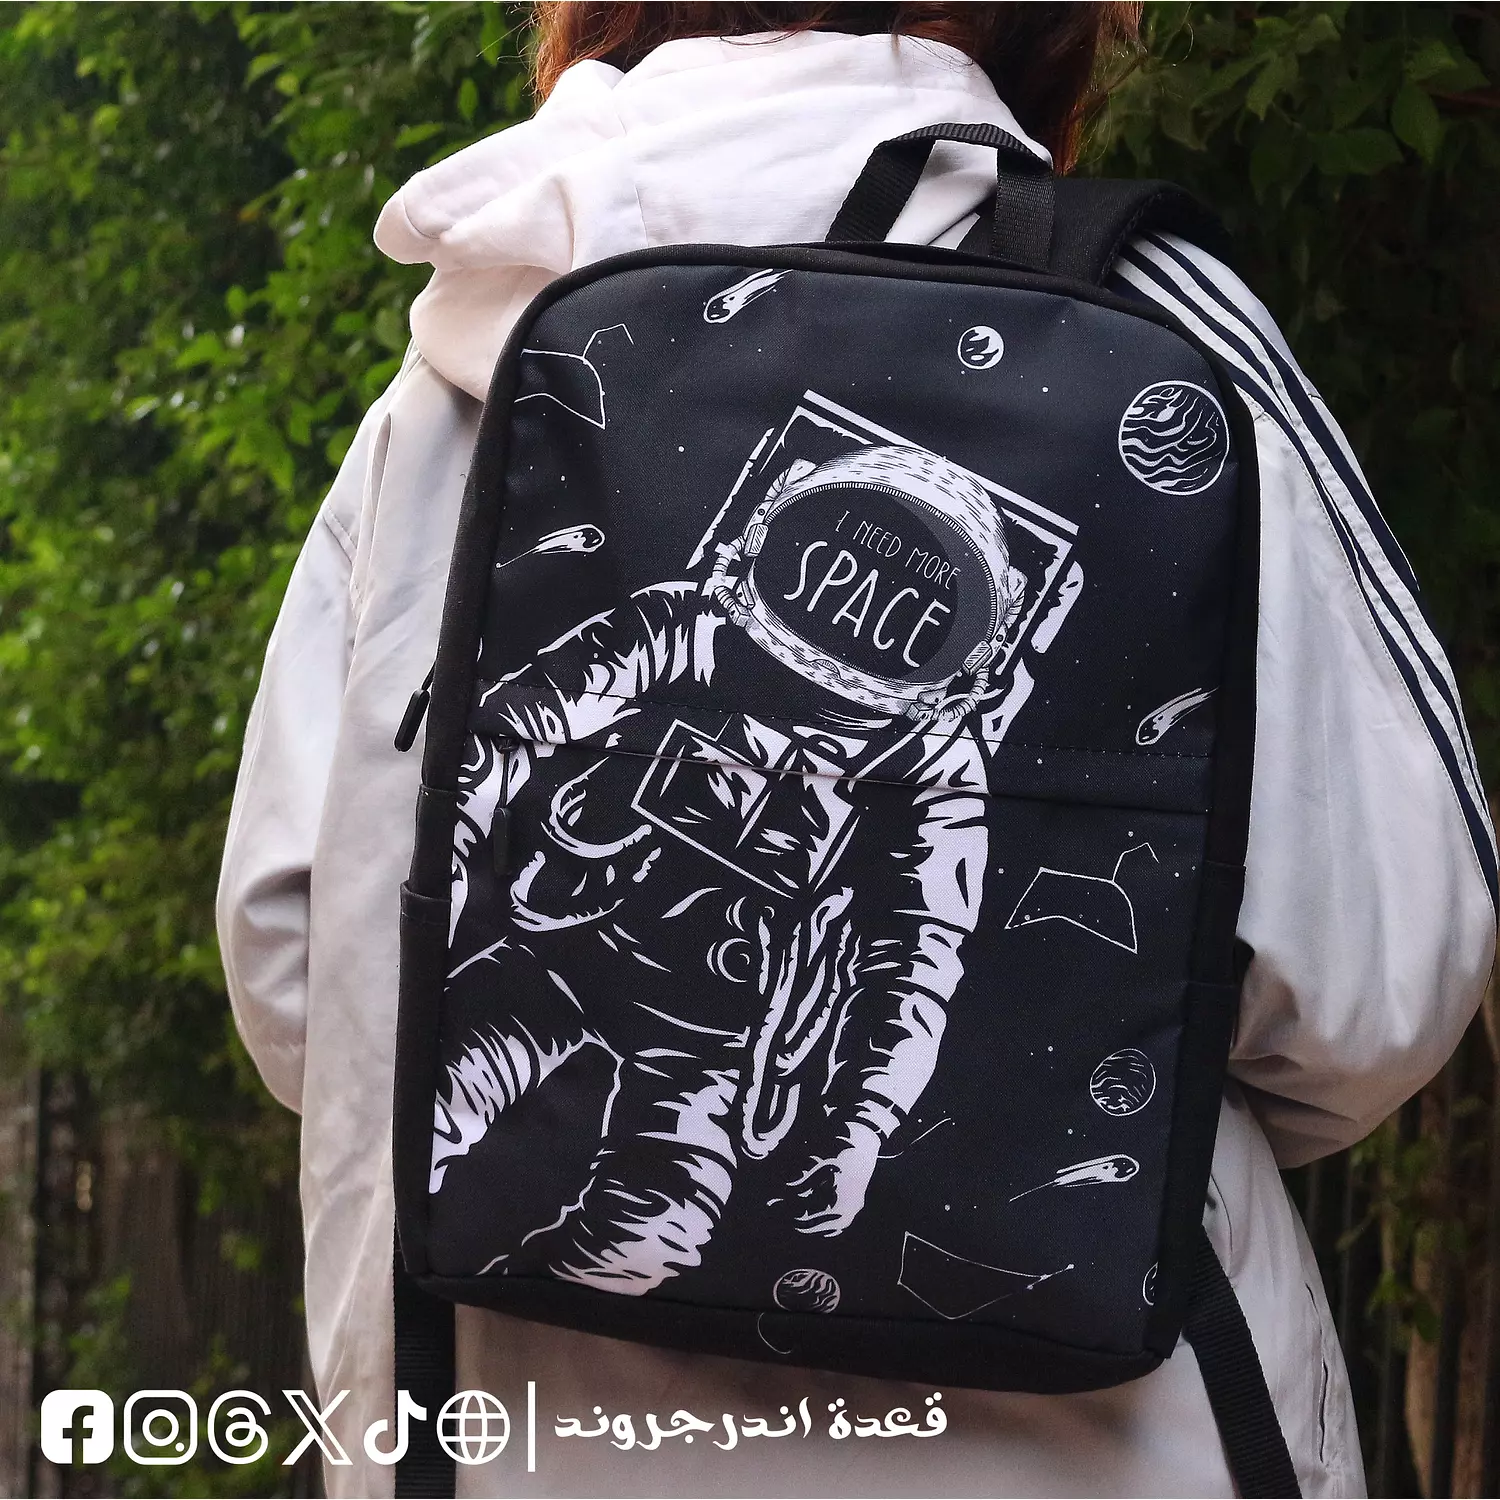 Need Some Space 🌌 🚀 Backpack 🎒 hover image